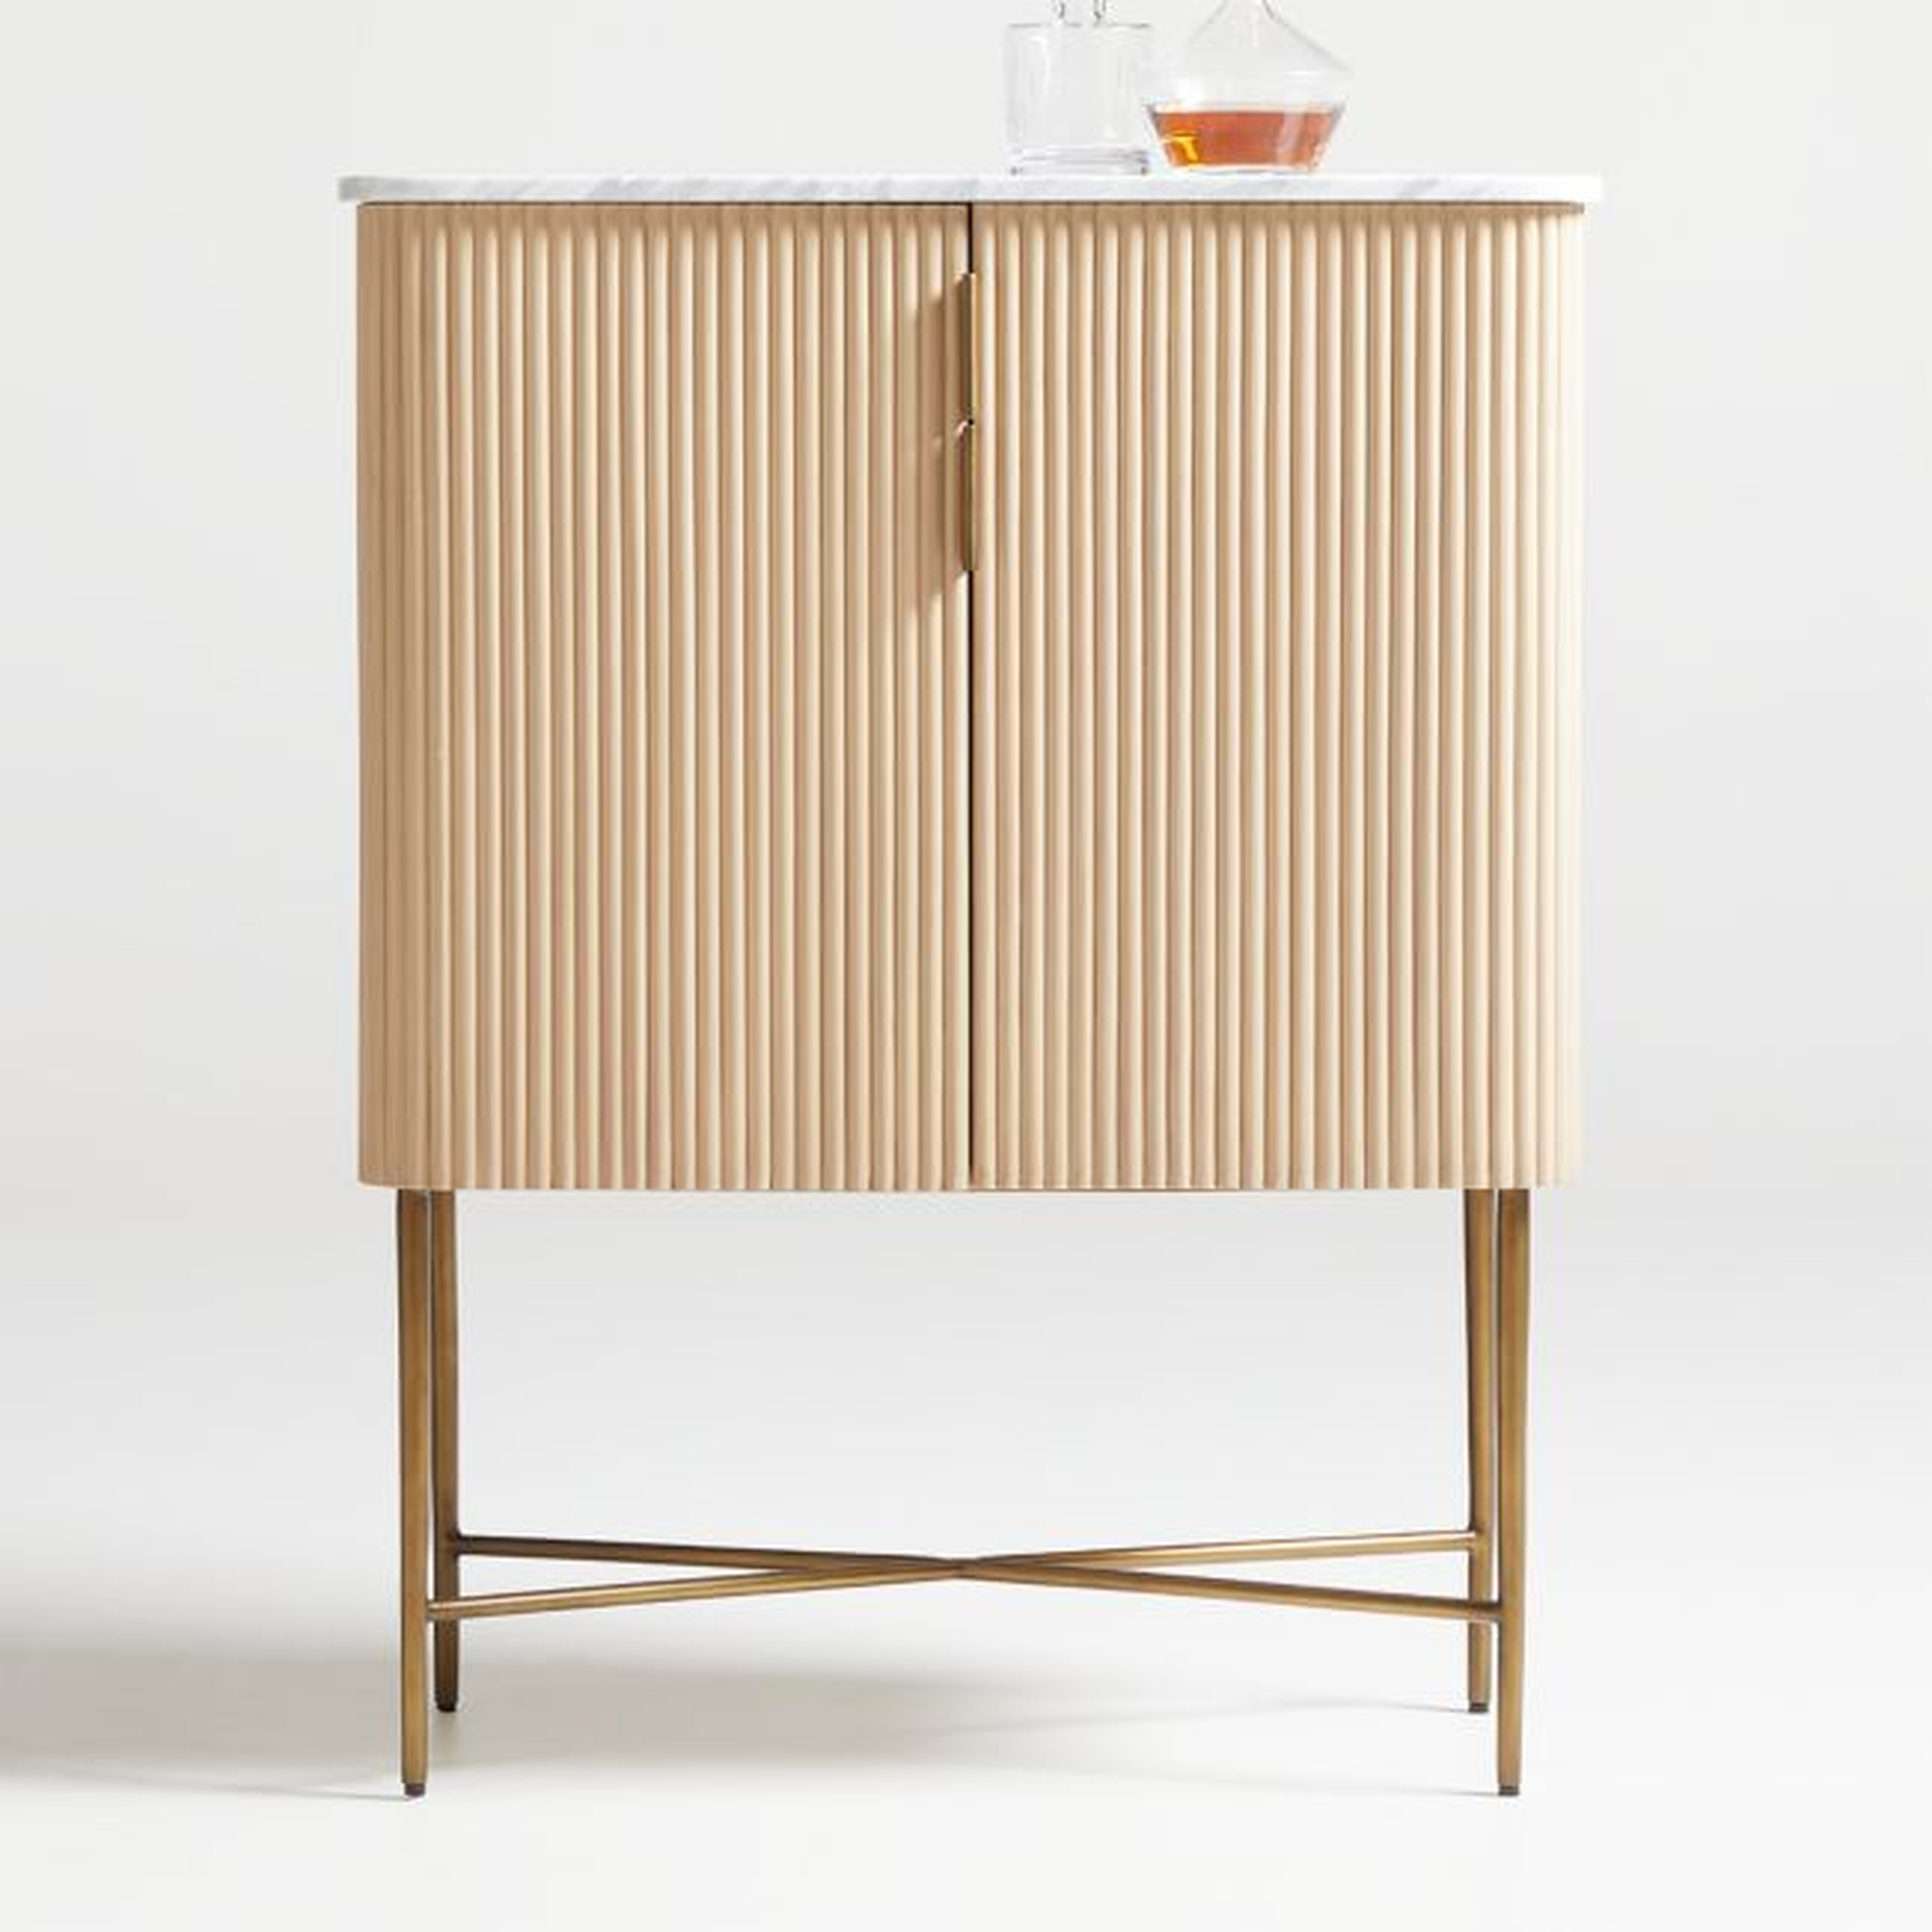 Fayette Bar Cabinet - Crate and Barrel